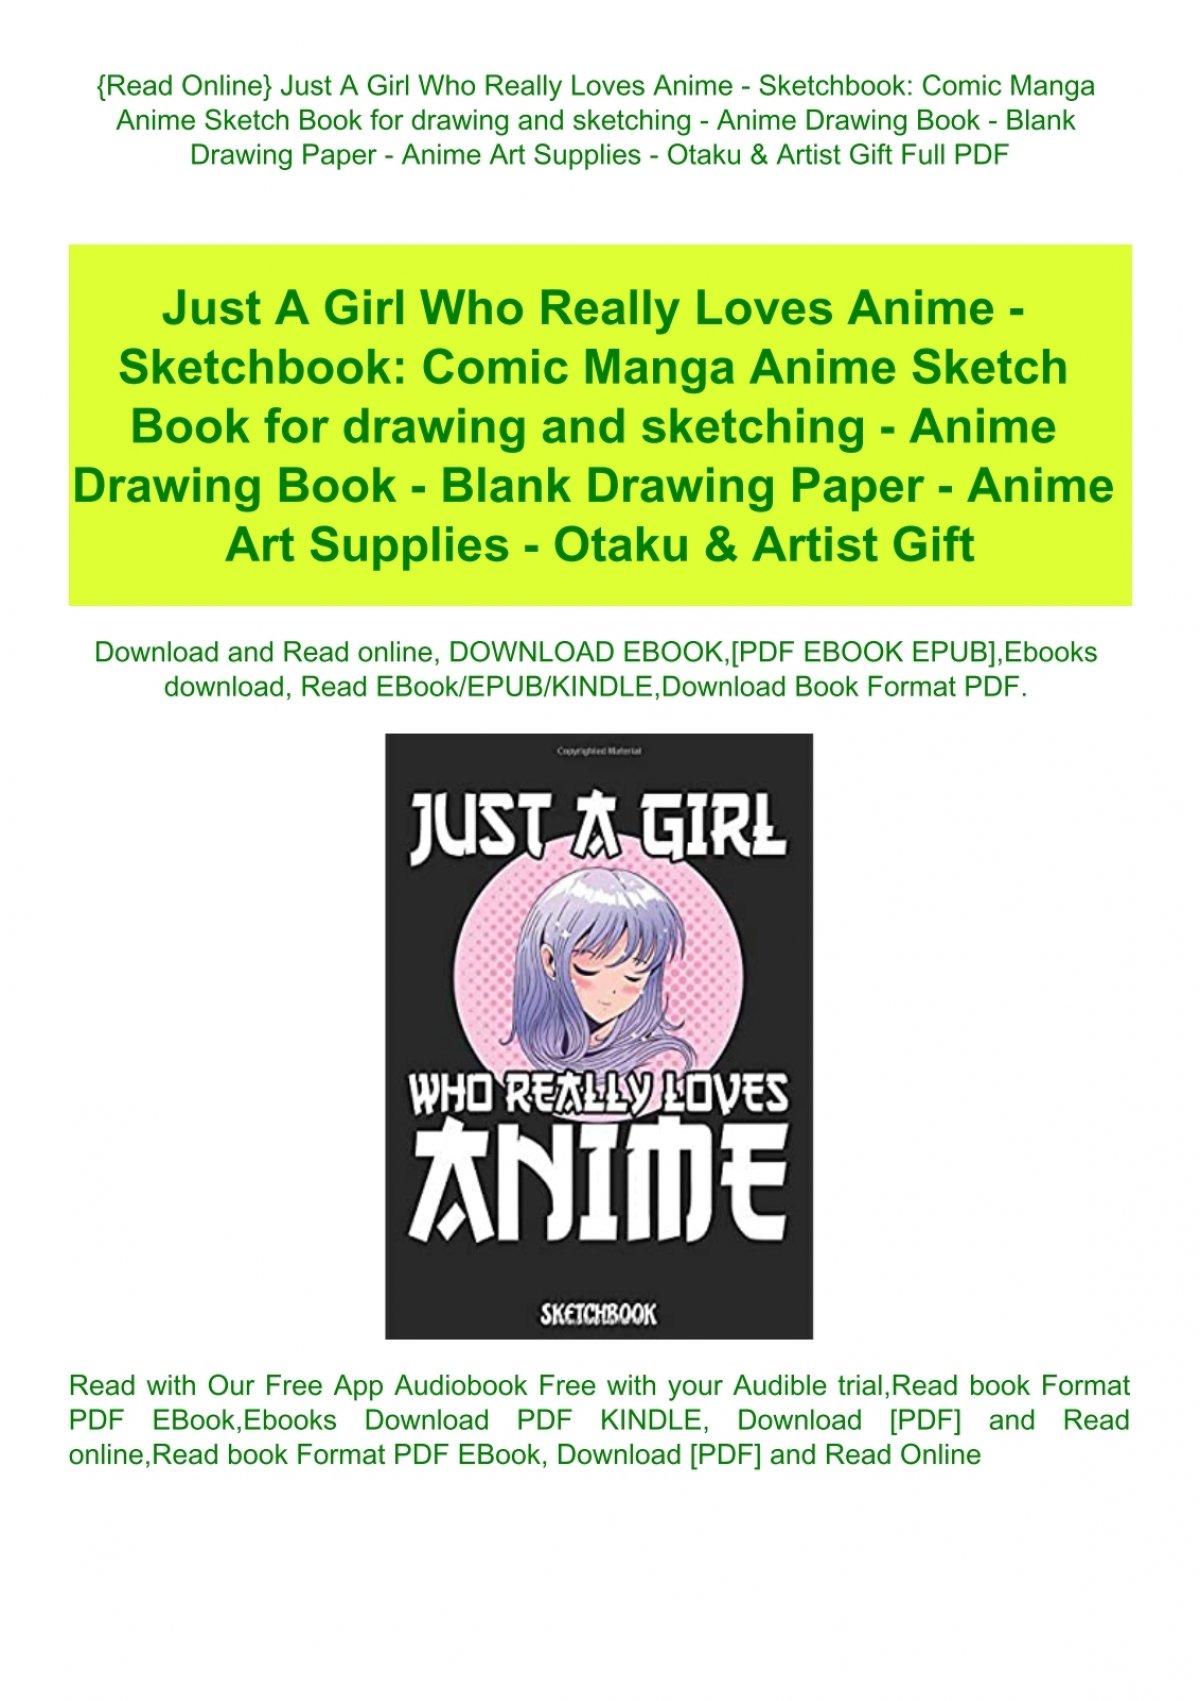 Read Online} Just A Girl Who Really Loves Anime - Sketchbook Comic